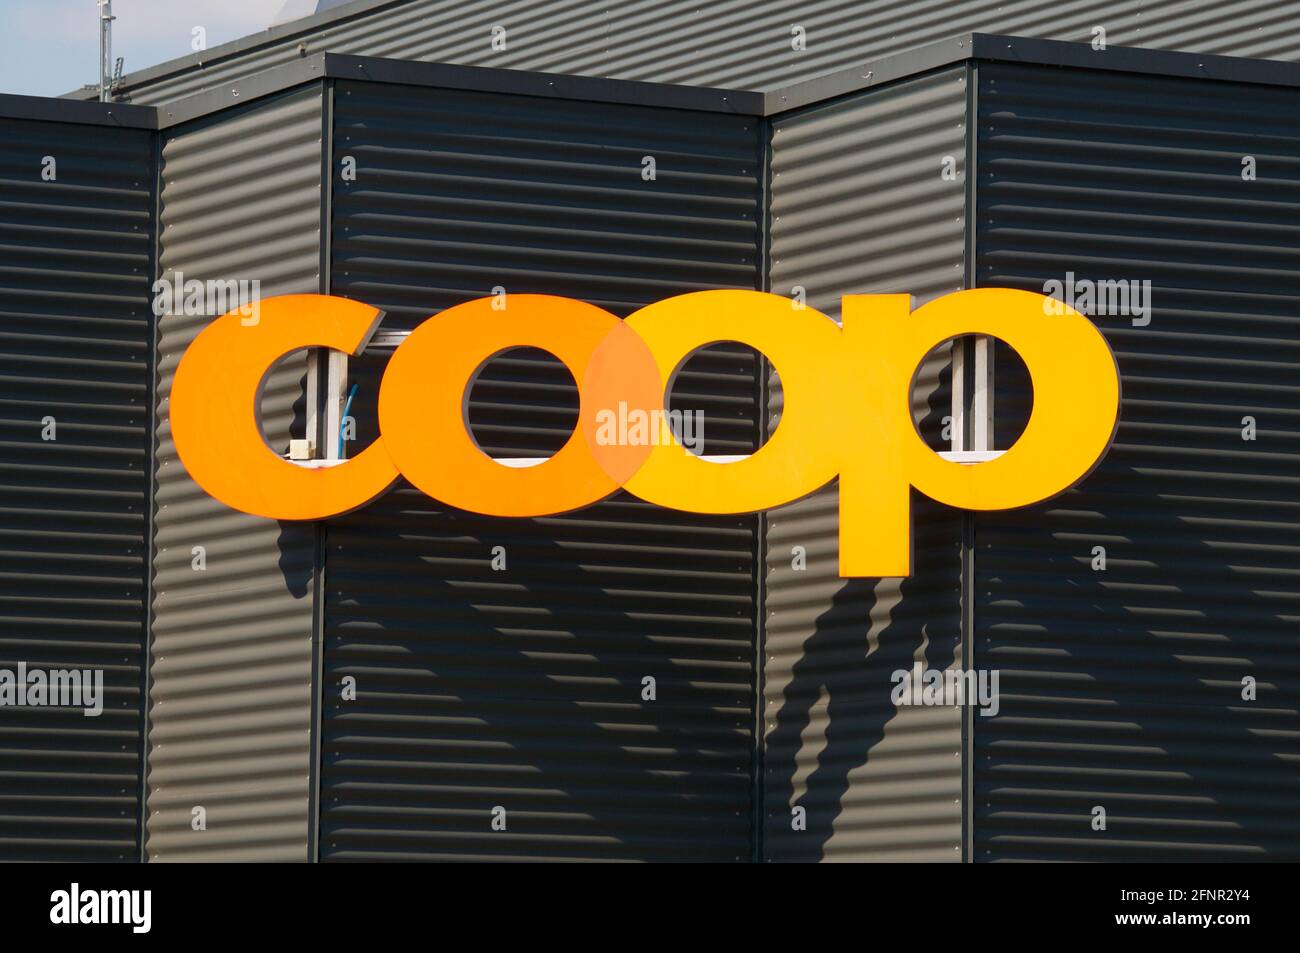 Dietlikon, Zurich, Switzerland - 16th April 2021 : Coop logo sign on a store building in Dietlikon. The Coop Group is one of Switzerland's largest ret Stock Photo